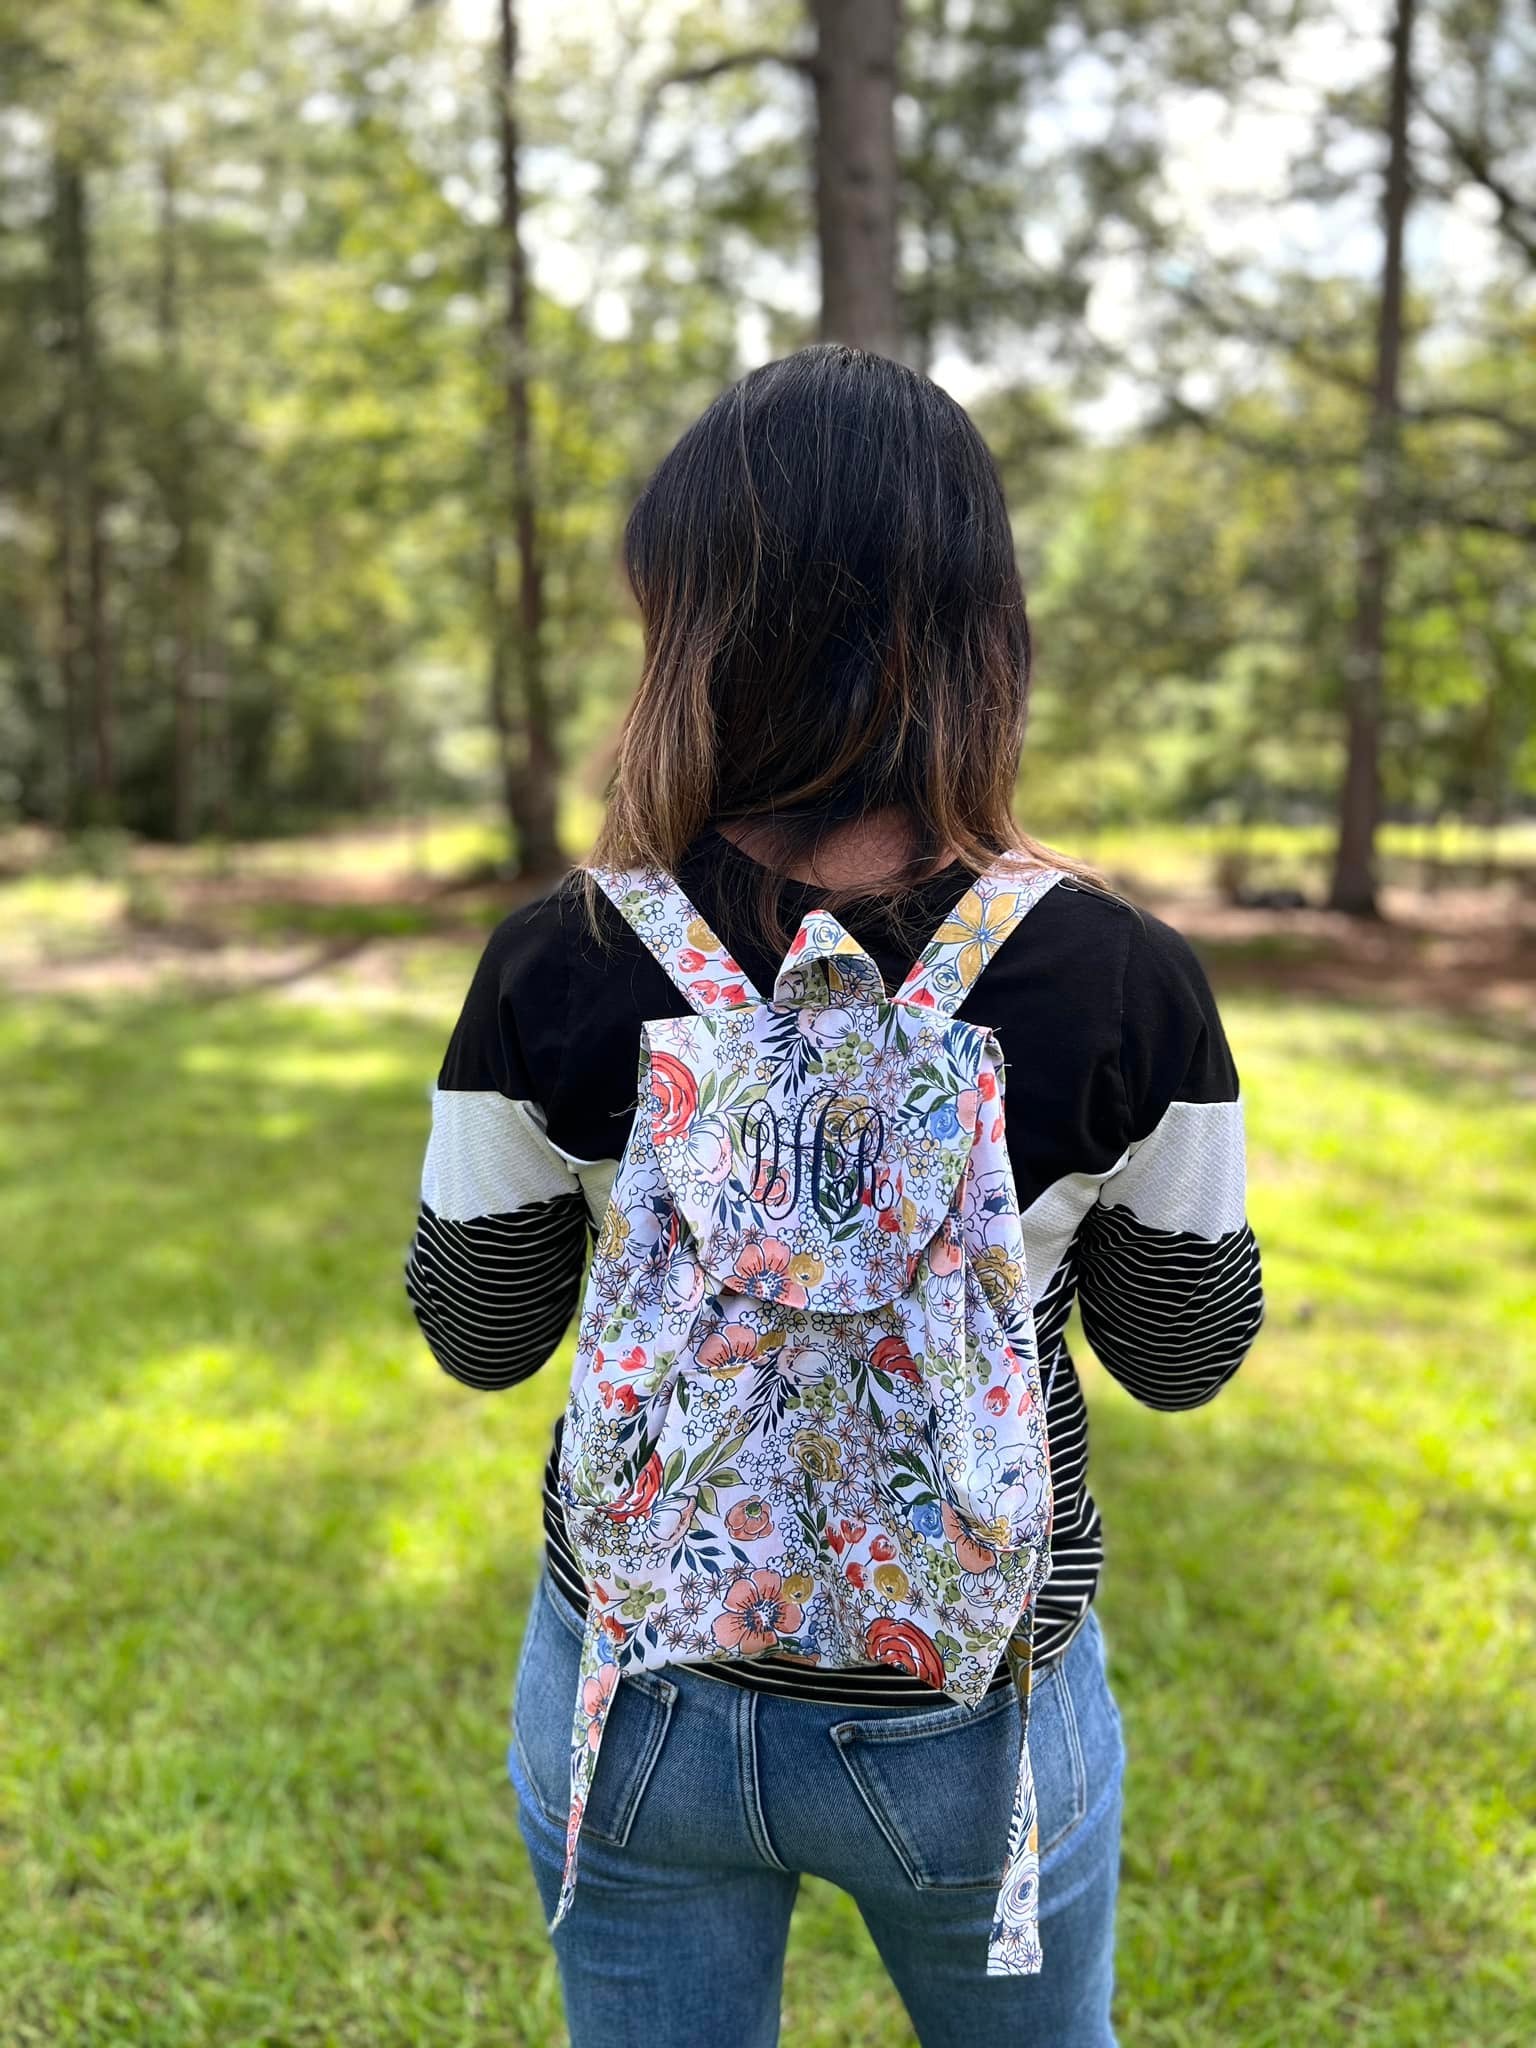 Pack Your Bag Backpack Sewing Pattern